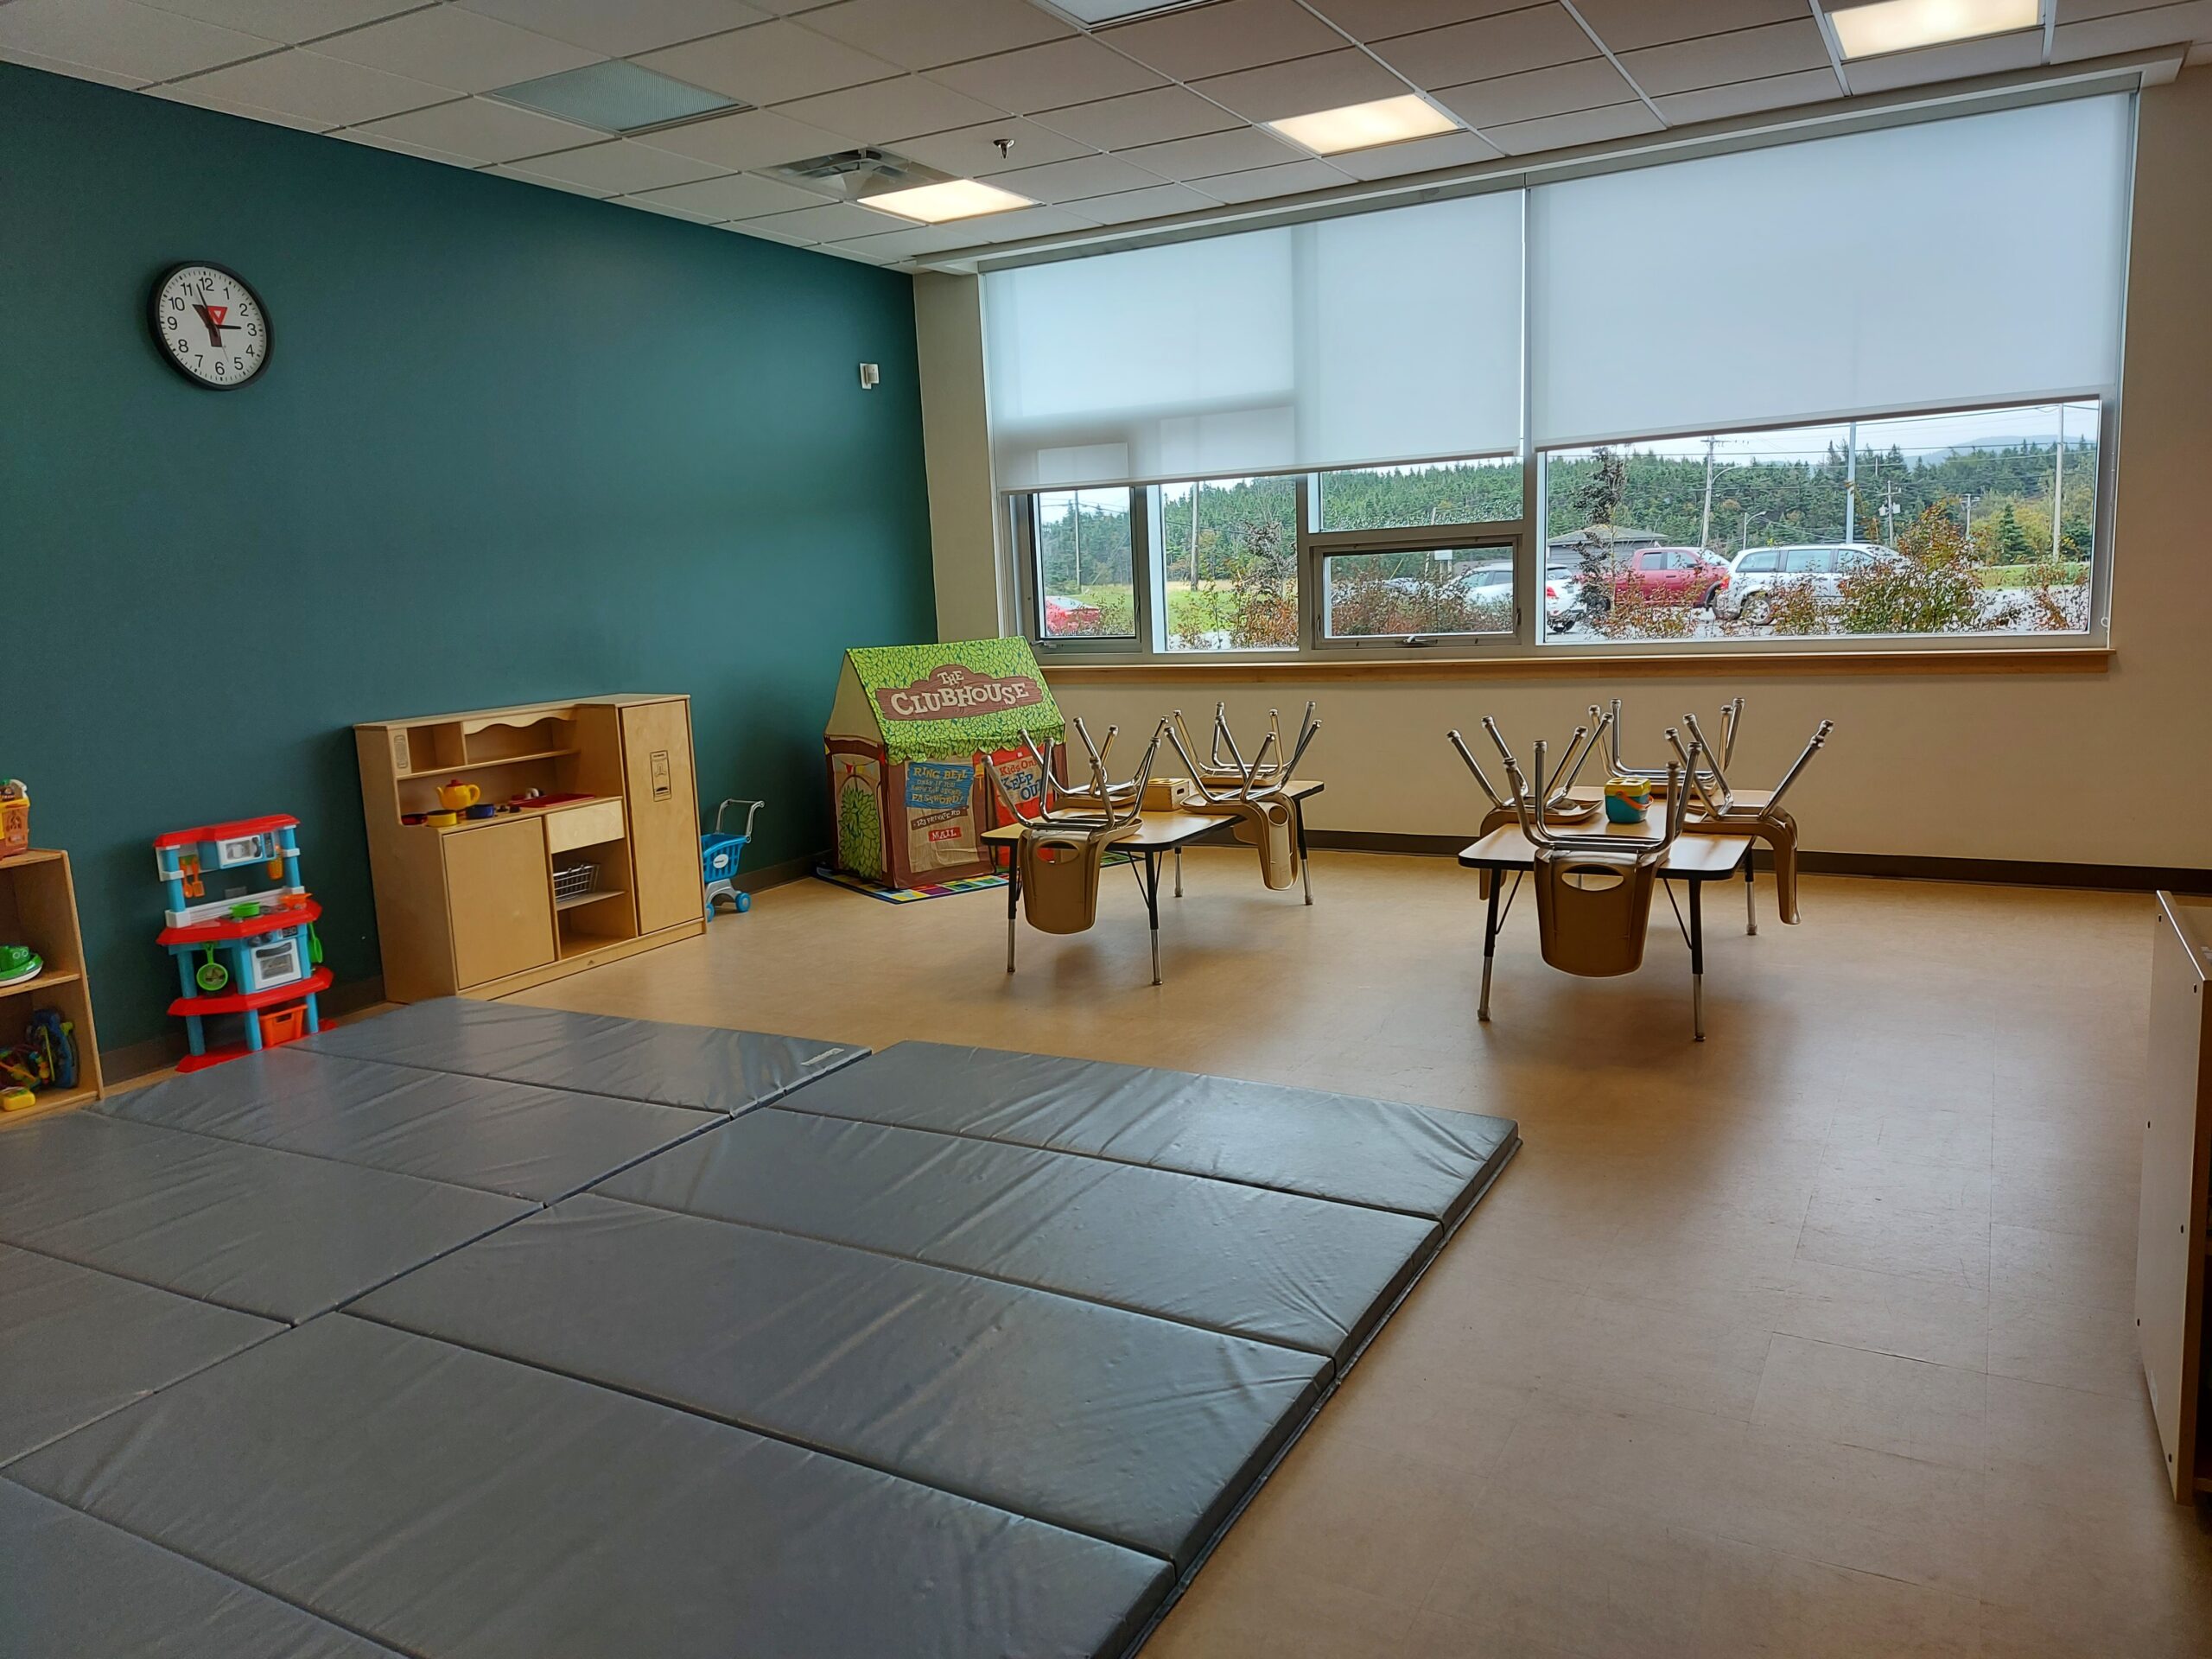 A wide angle view of a birthday party room at the YMCA